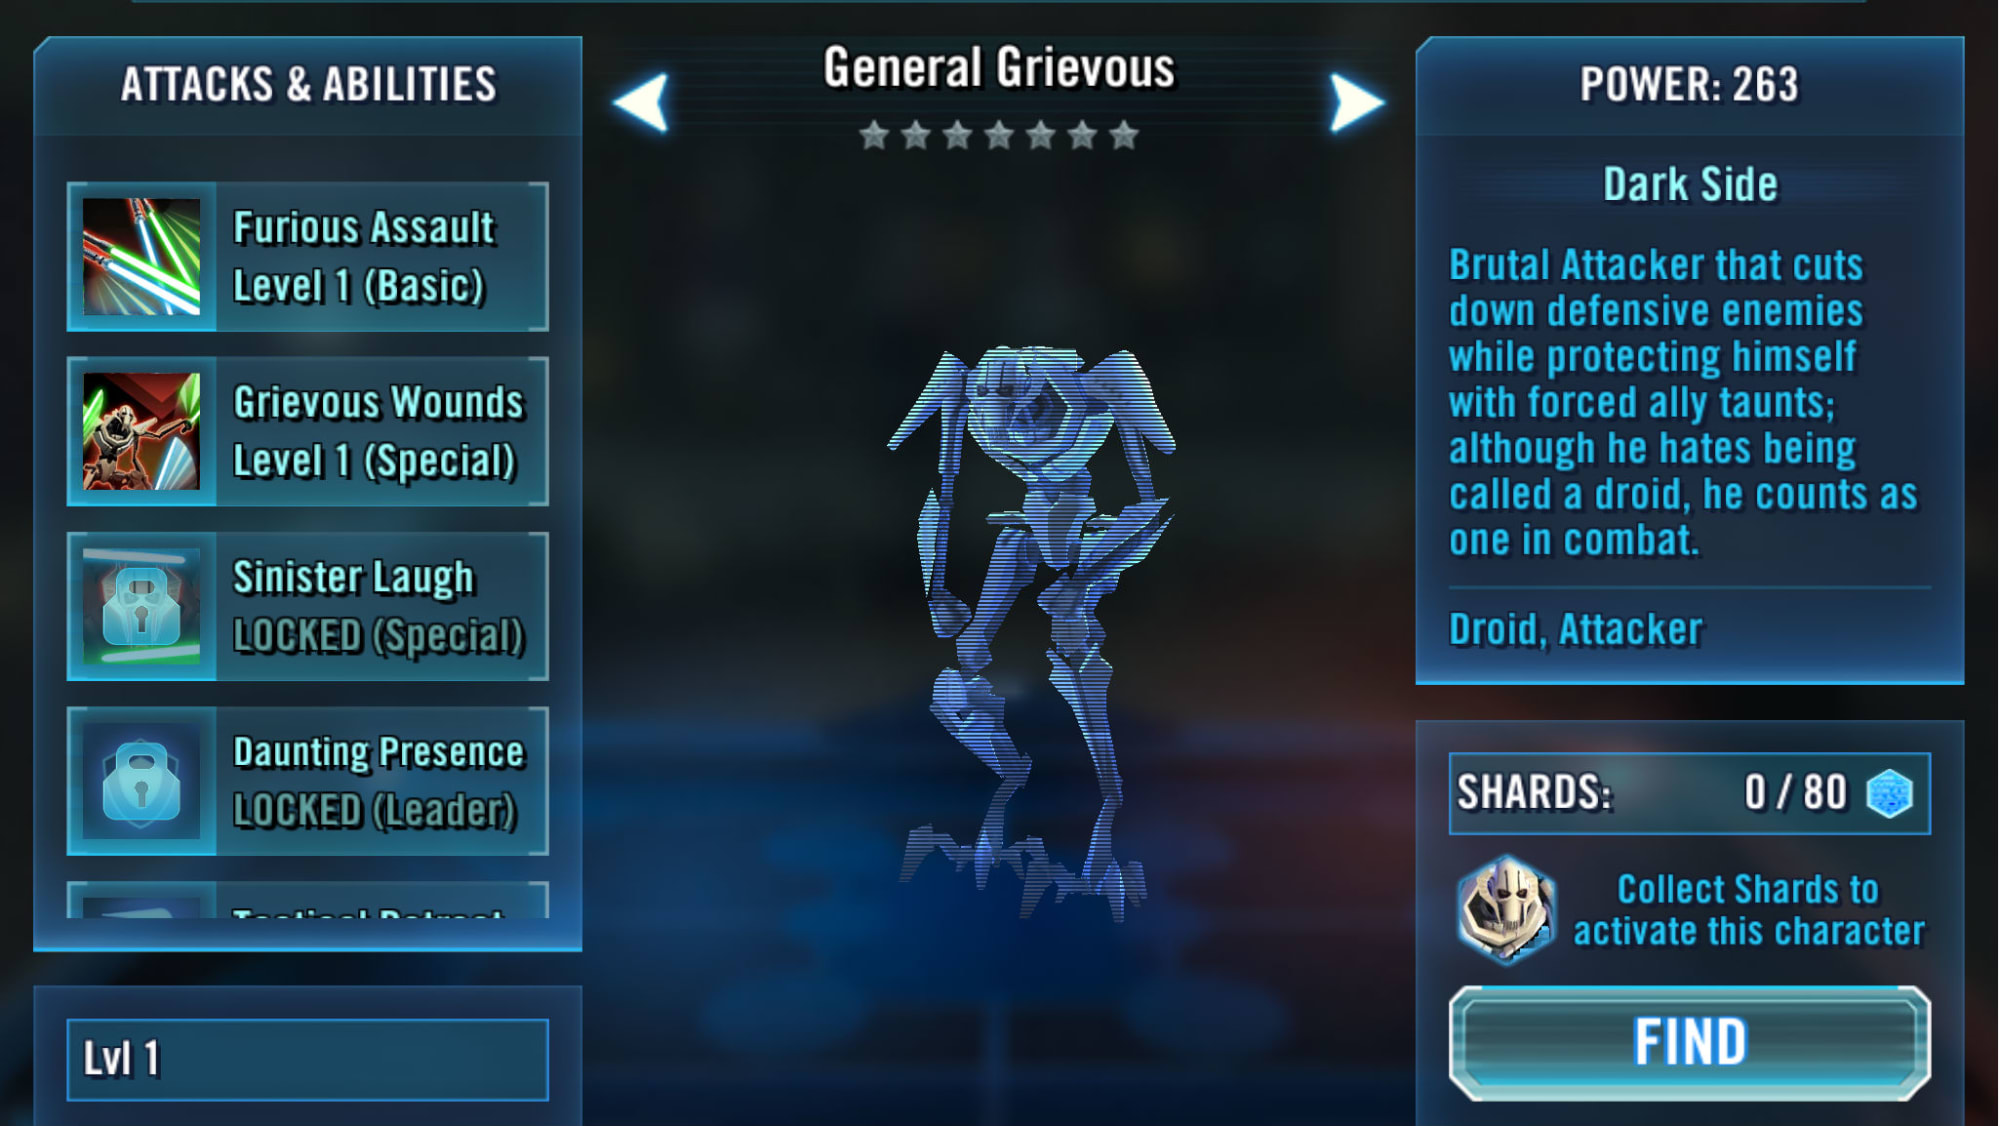 How to Get General Grievous in Star Wars: Galaxy of Heroes